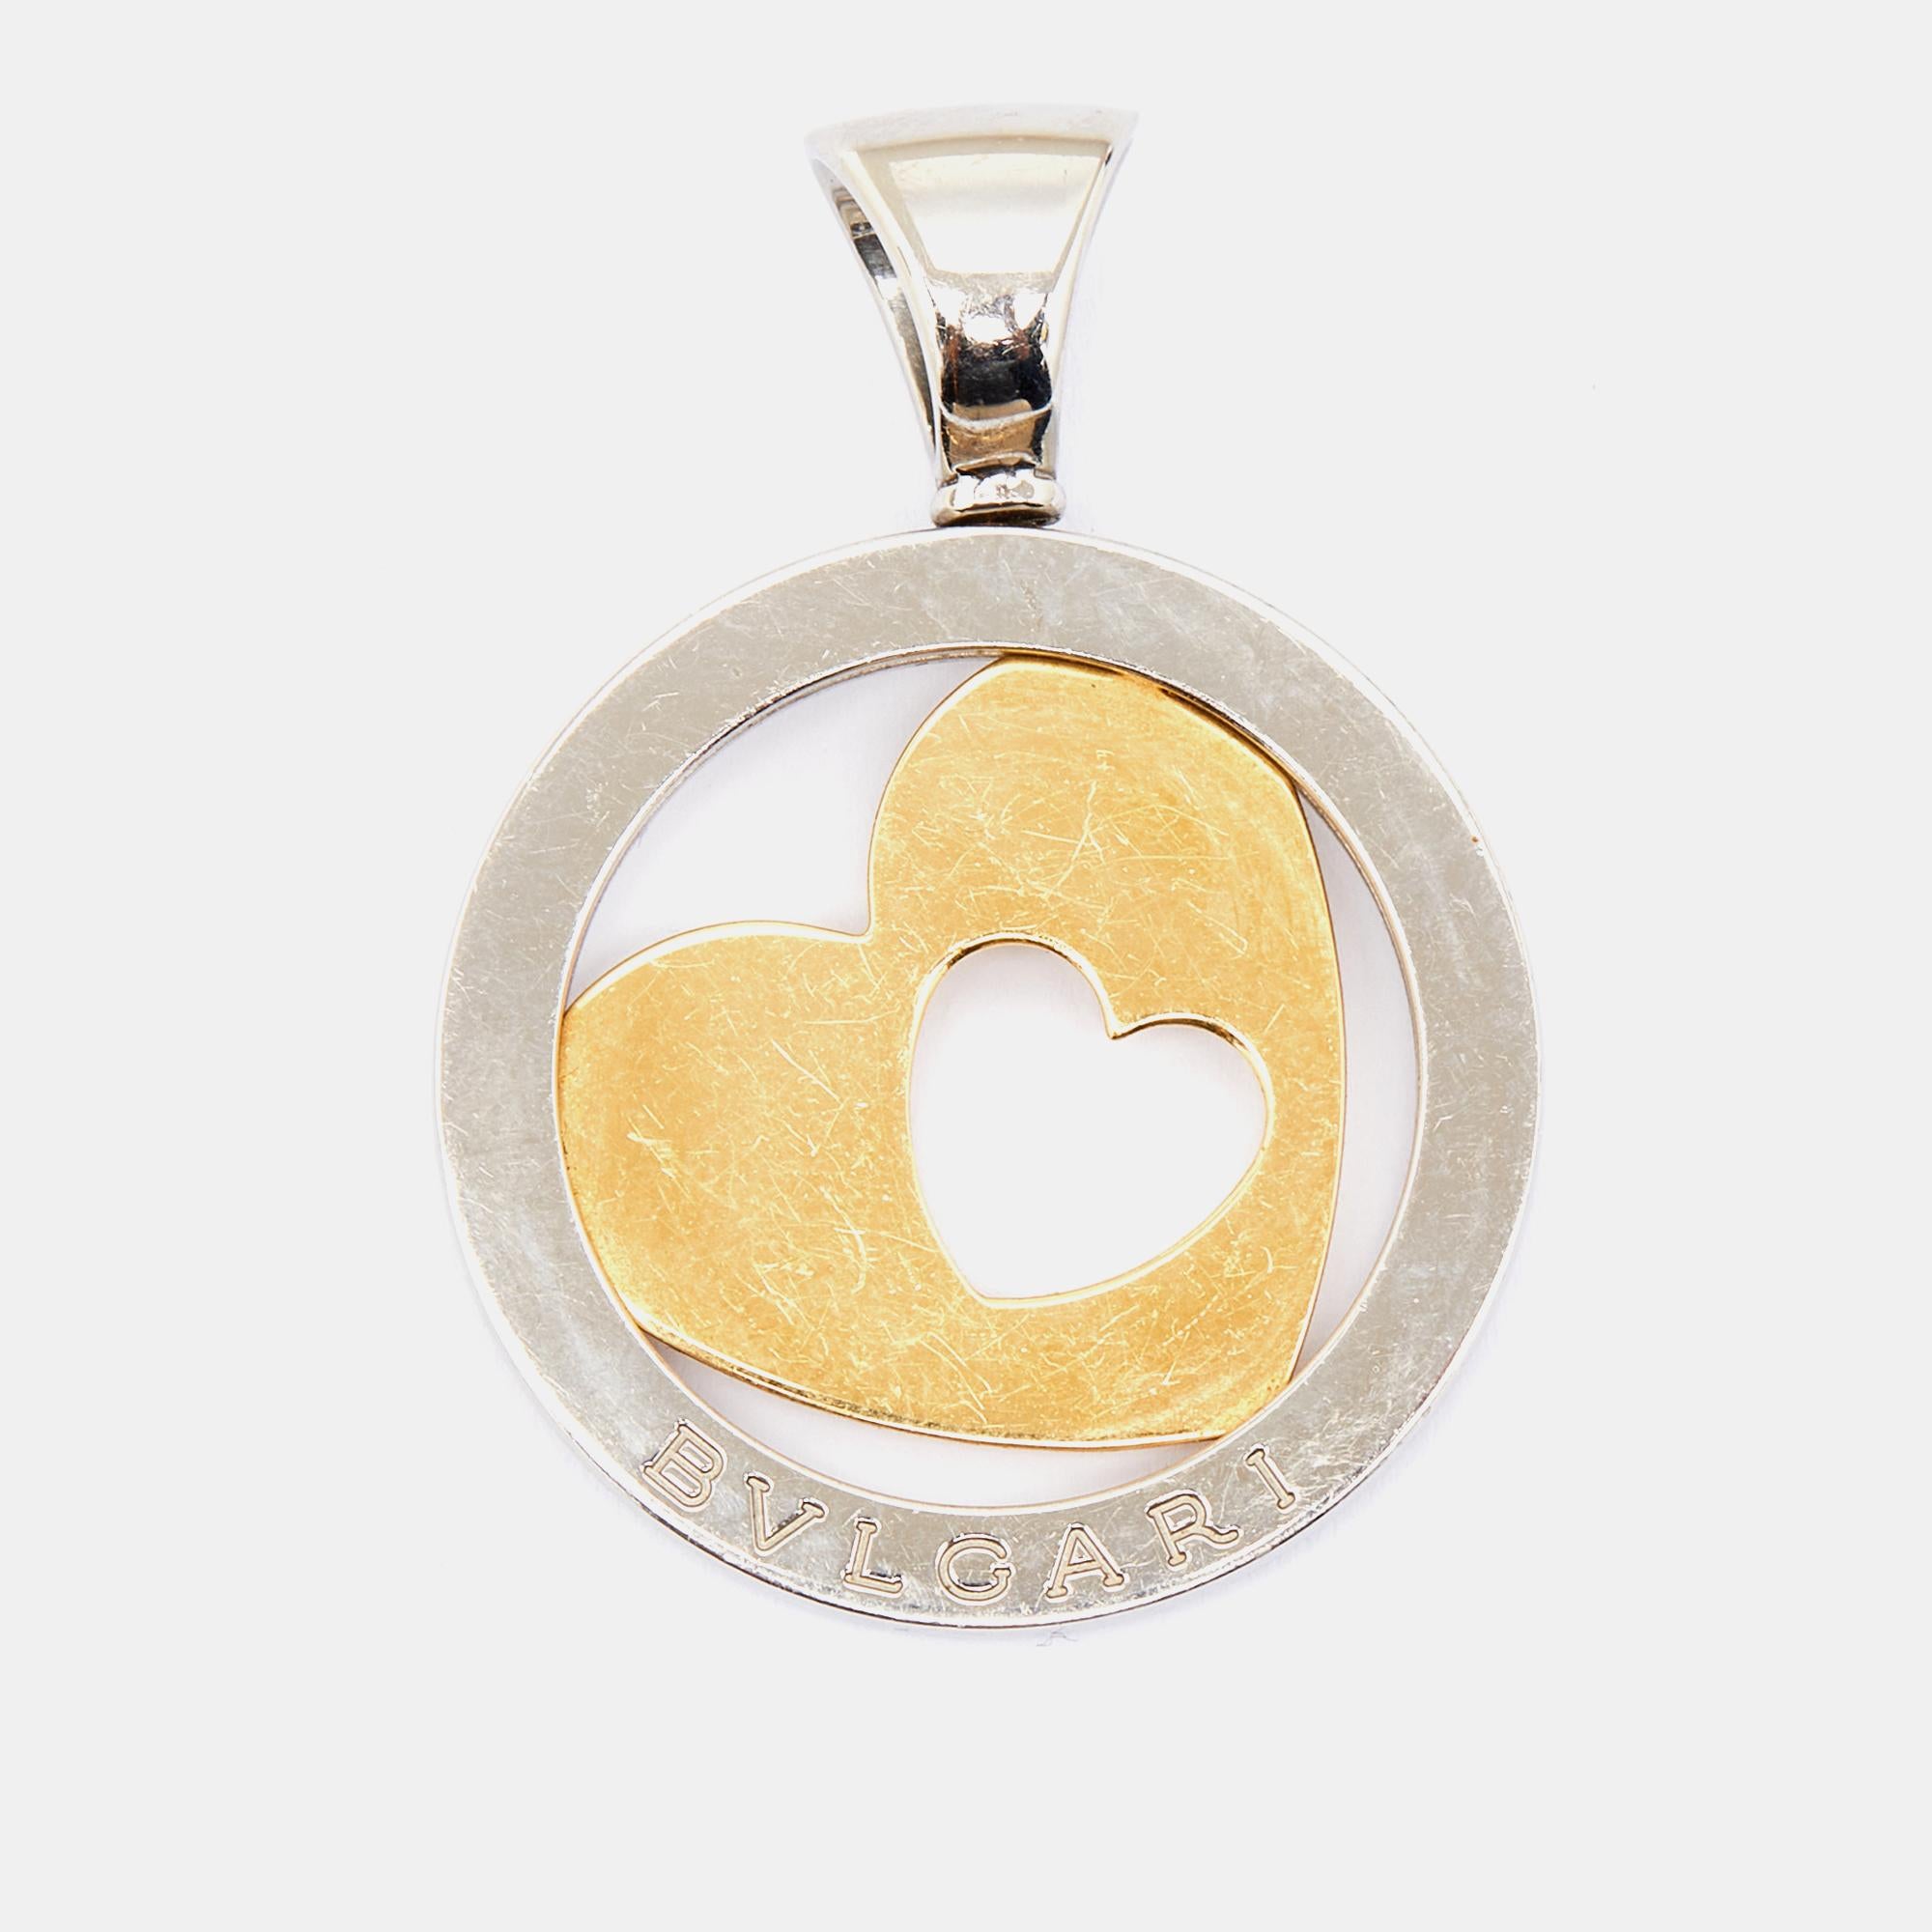 Weighing 11.70 grams, this Tondo Heart pendant from Bvlgari comes with a bail to loop into a necklace chain/cord. It has been crafted from stainless steel and 18k yellow gold.

